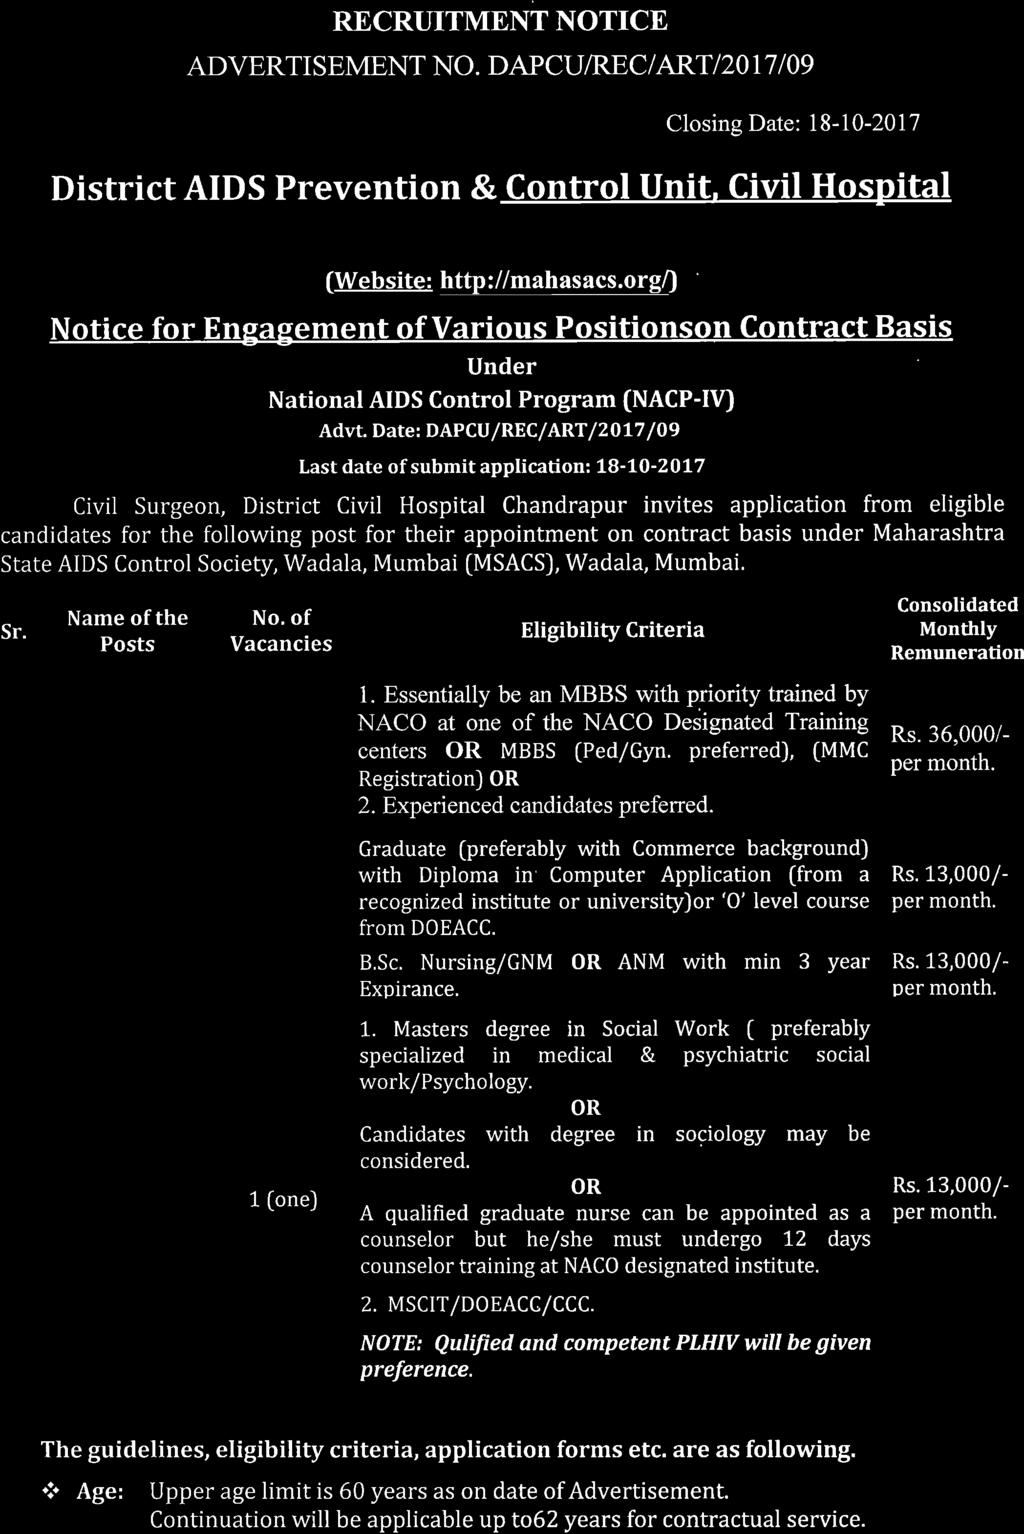 OL7 Civil Surgeon, District Civil Hospital Chandrapur invites application from eligible candidates for the following post for their appointment on contract basis under Maharashtra State AIDS Control